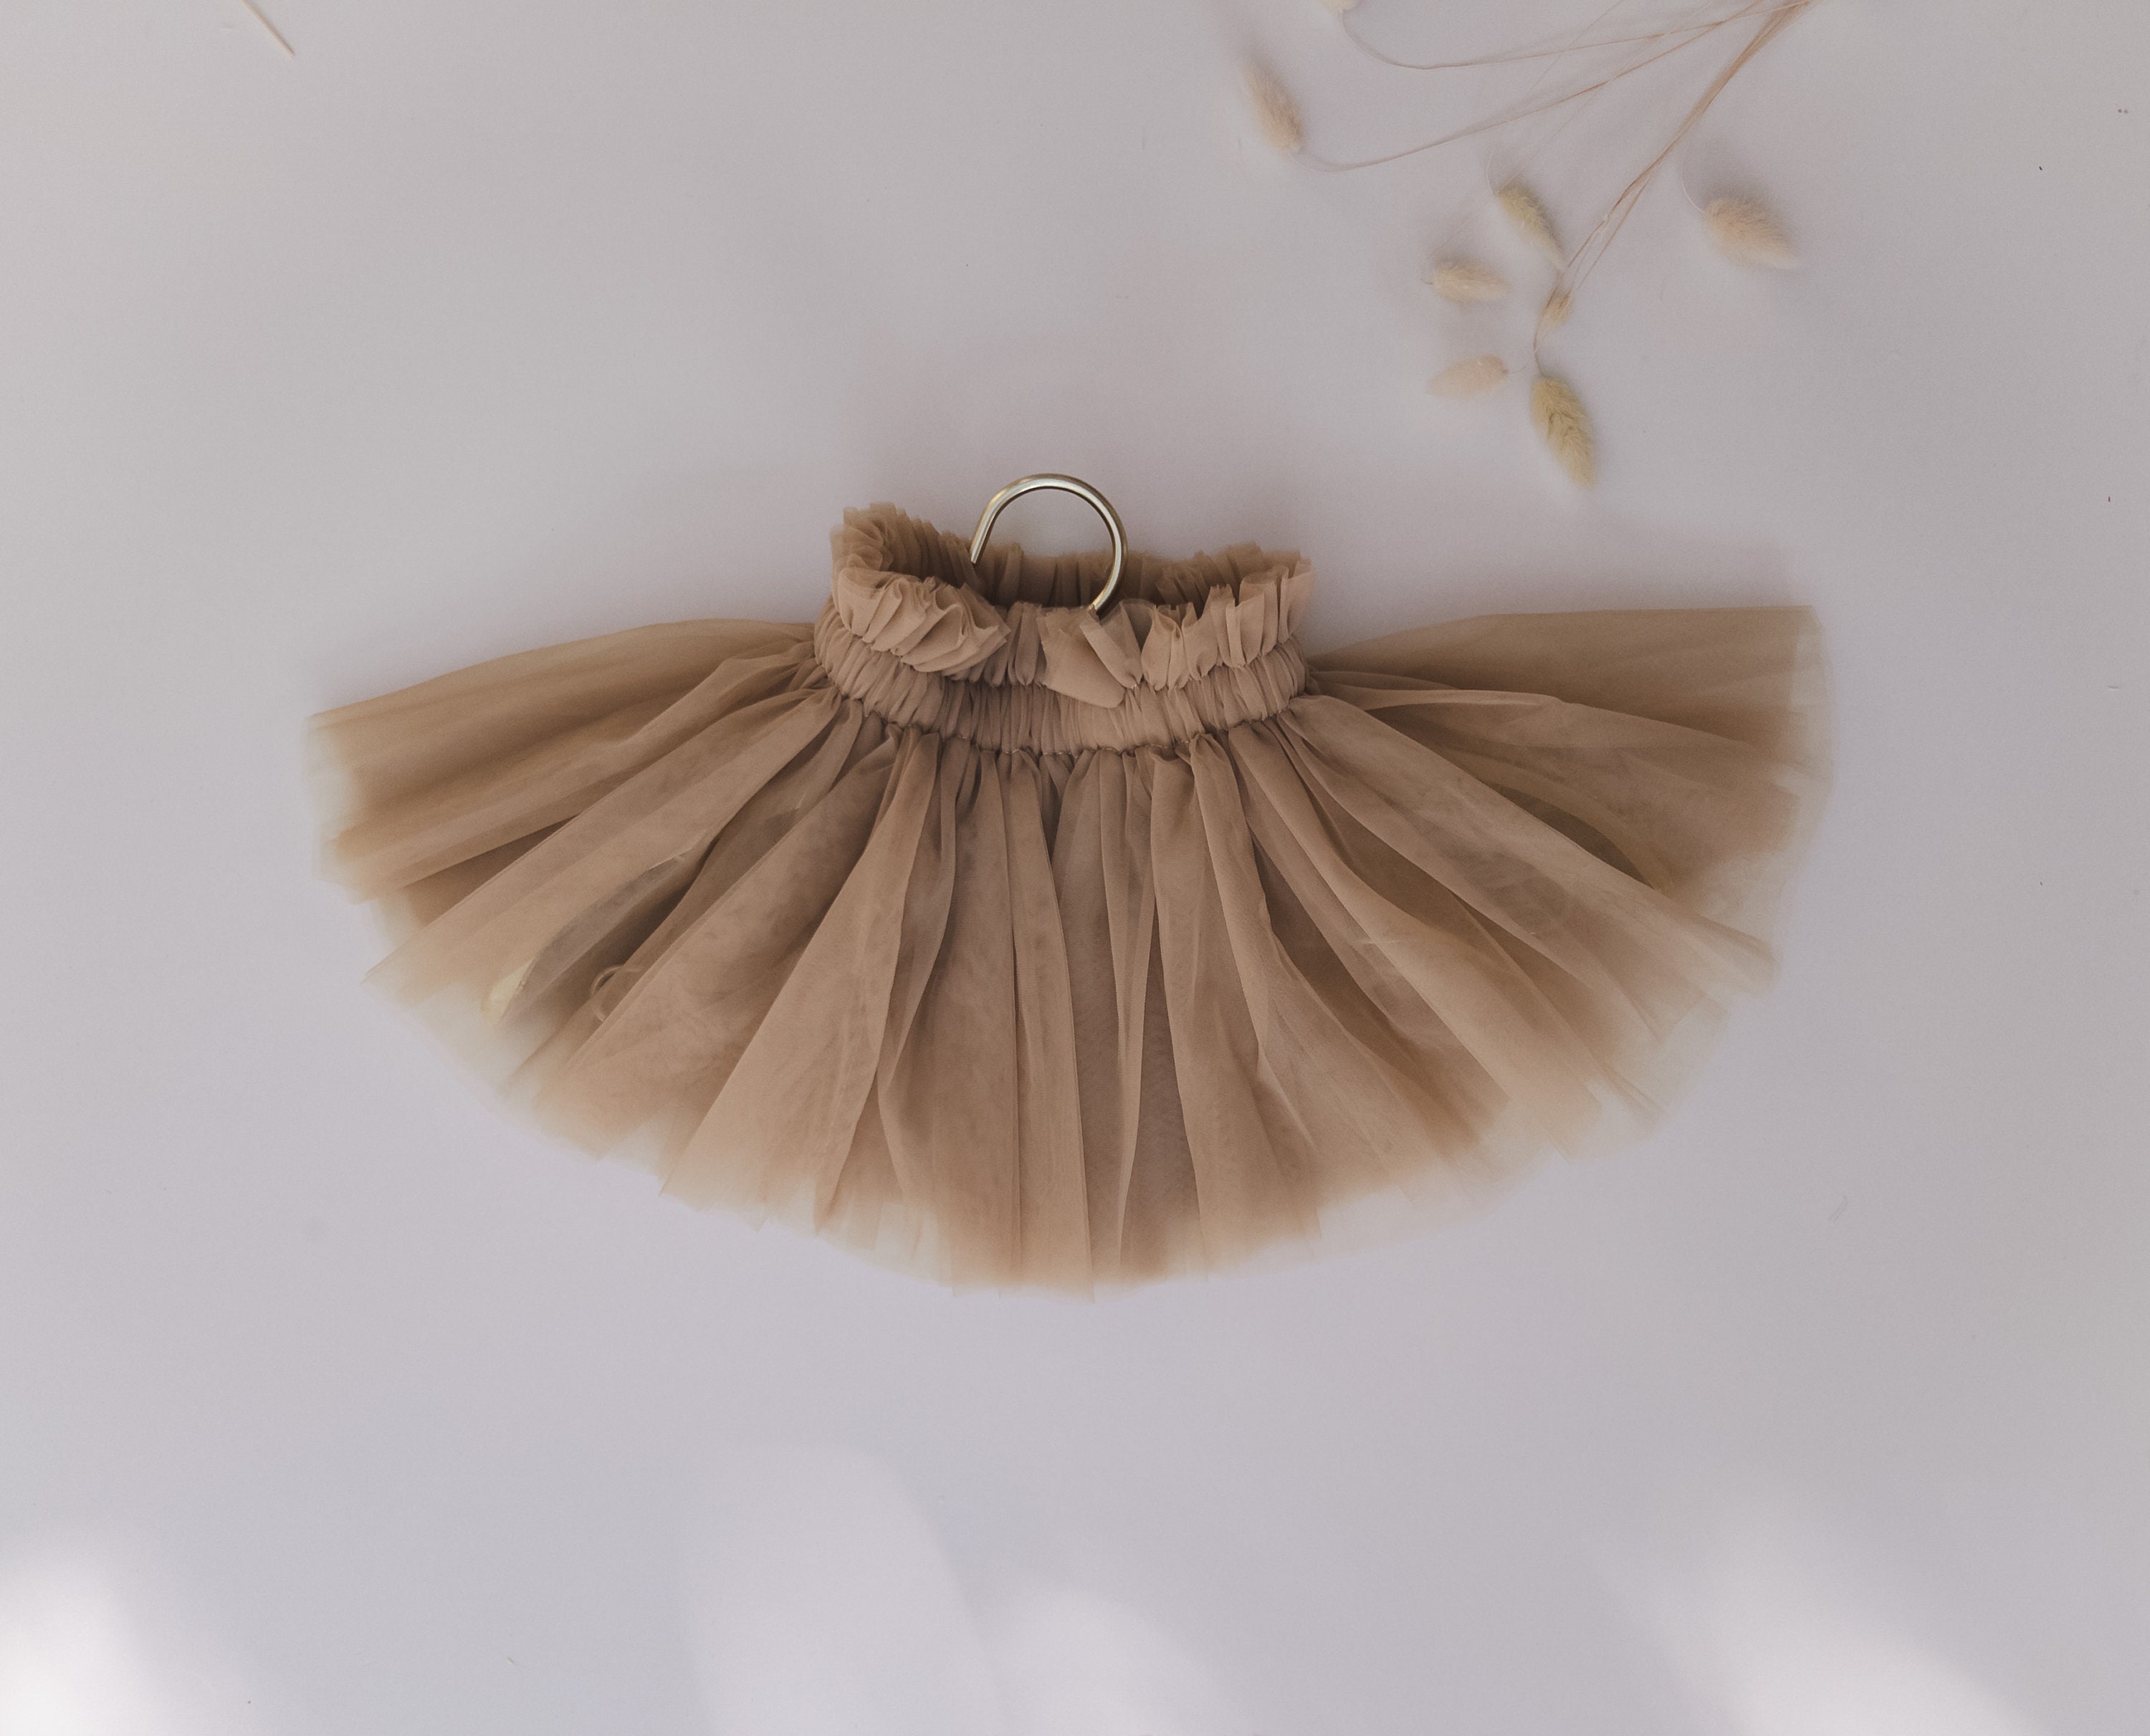 Taupe Soft Luxury Tulle Grey-brown Tulle Fabric Tutu Fabric Wedding Tulle  Material Tulle Net Fabric Party Decoration 300 сm Width 65 